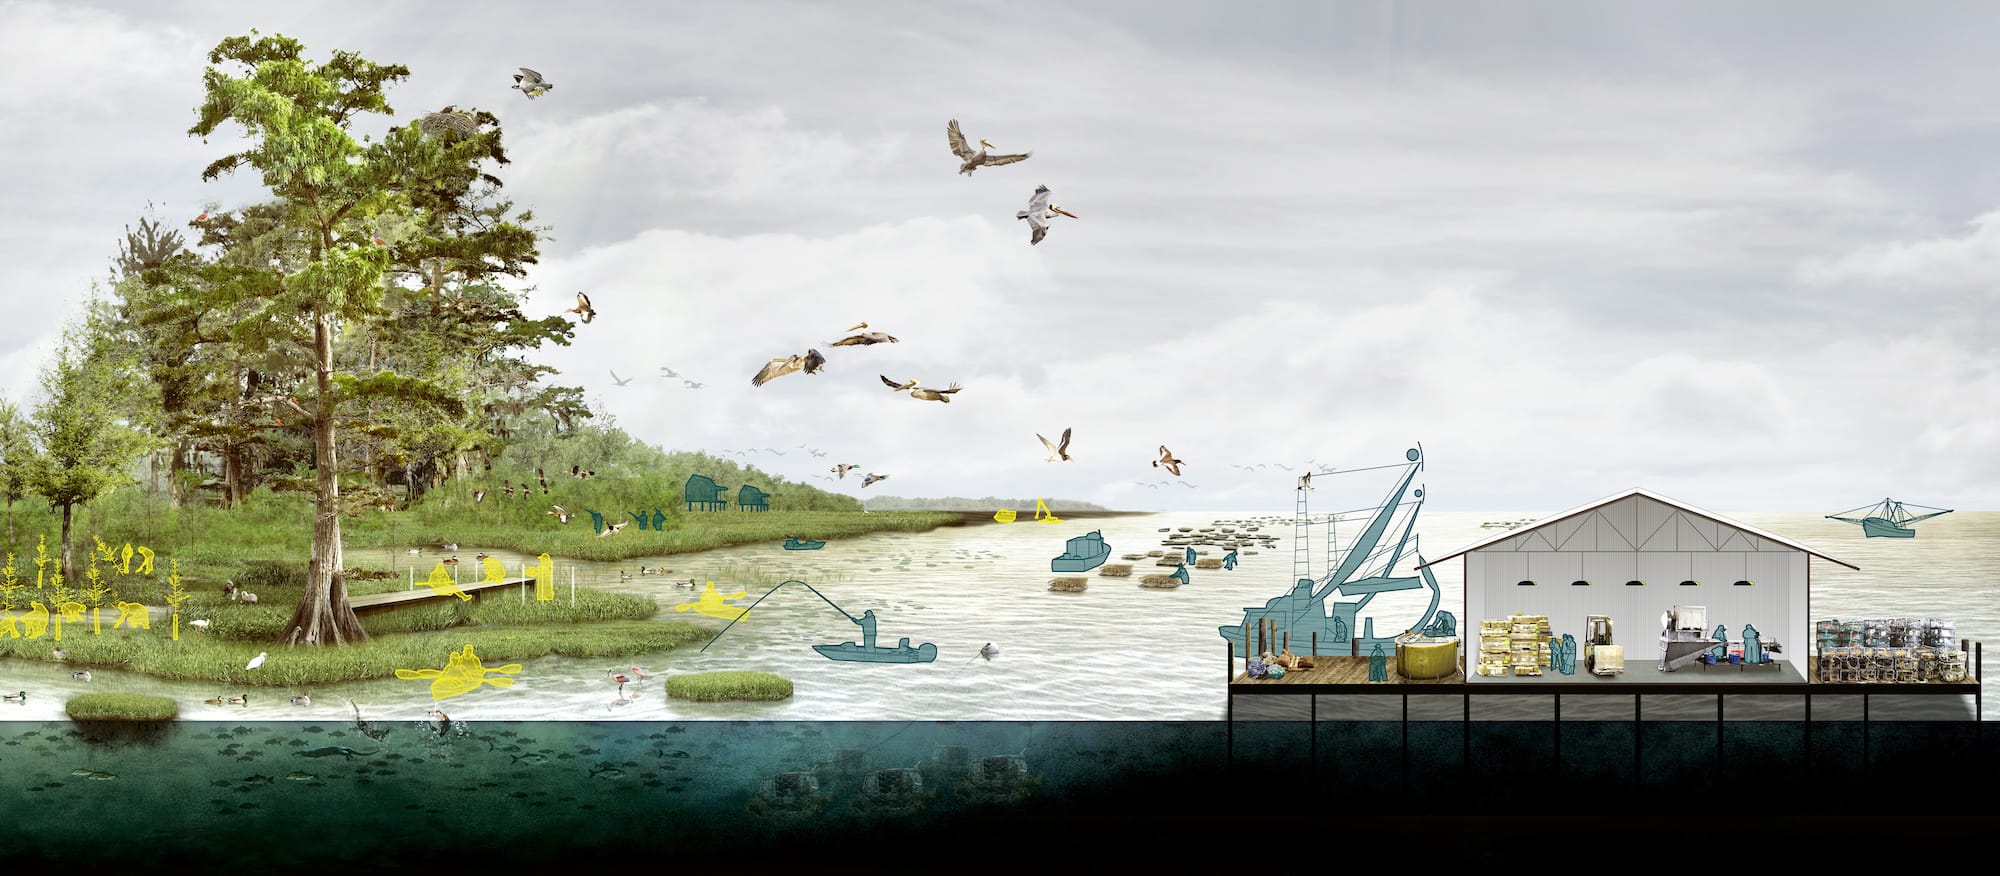 What our future wetlands can look like